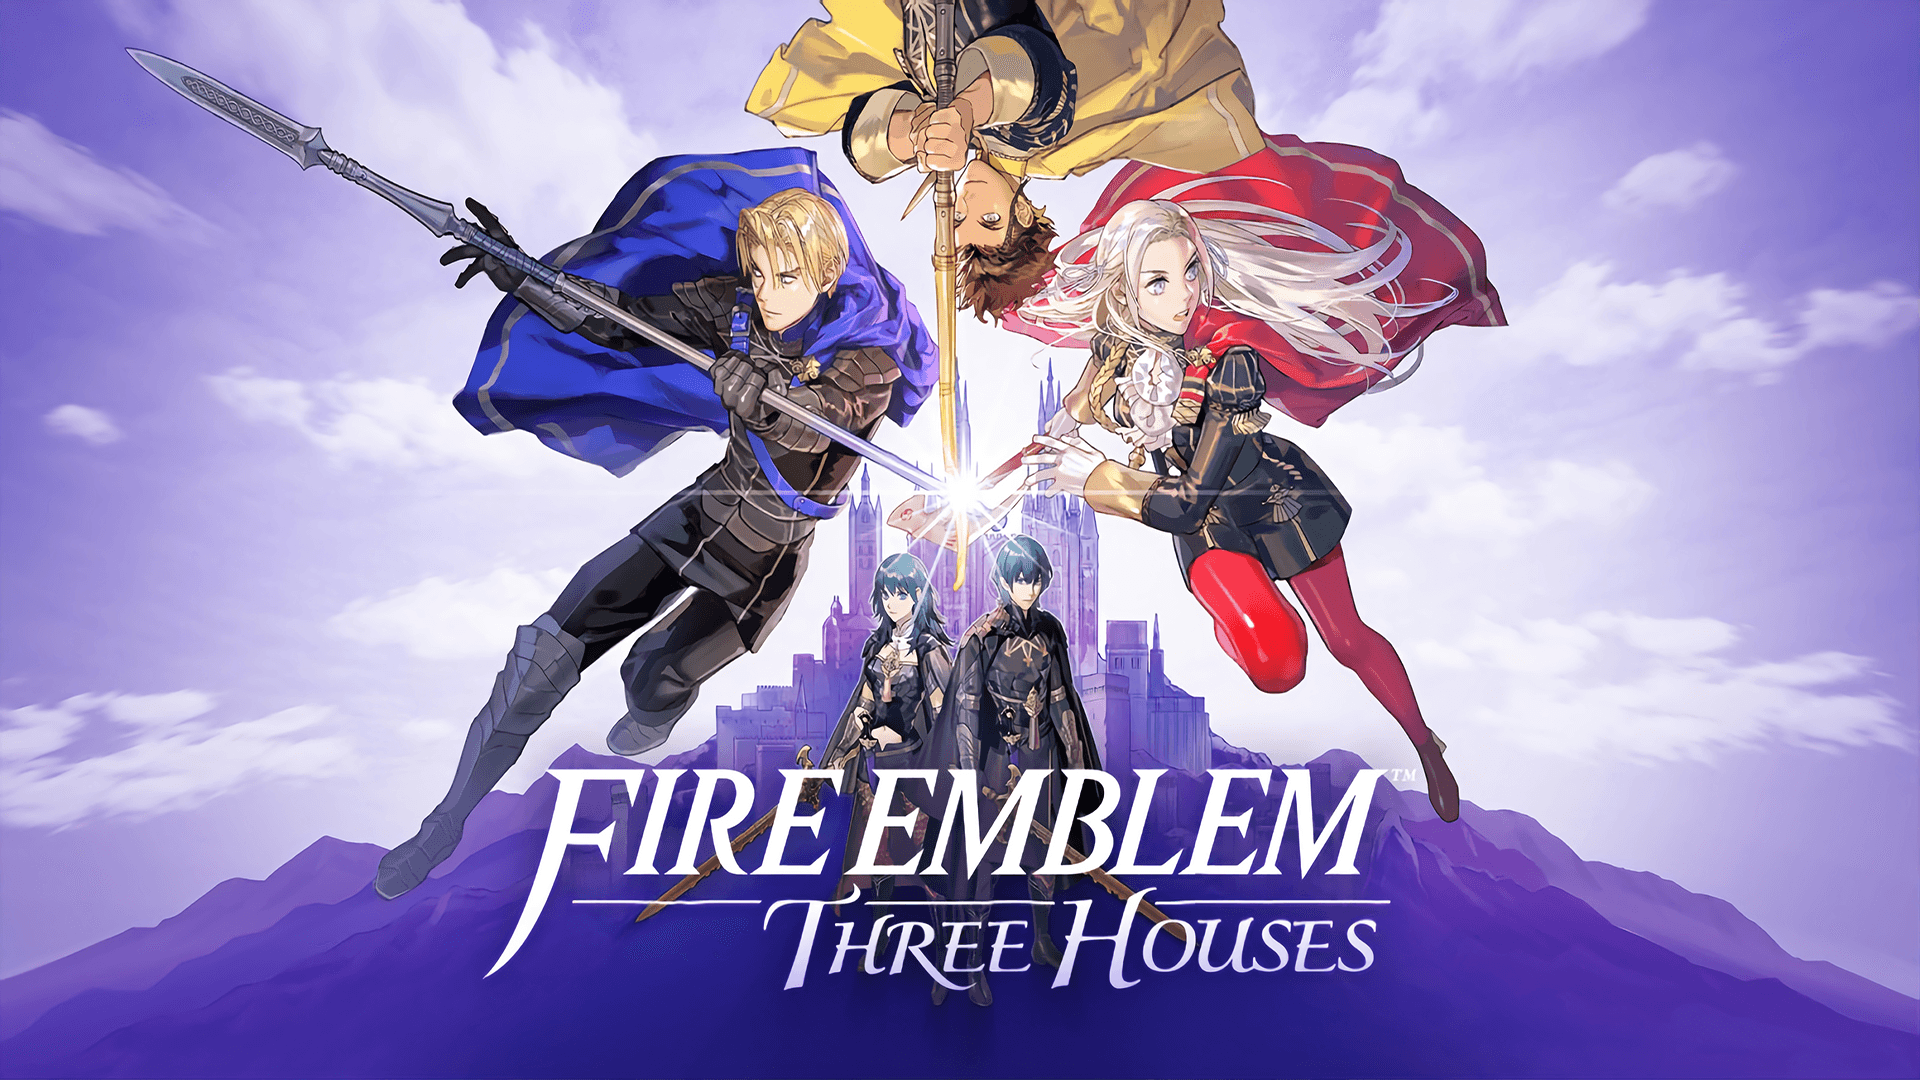 “Experience intense battles in the critically acclaimed Fire Emblem: Three Houses”